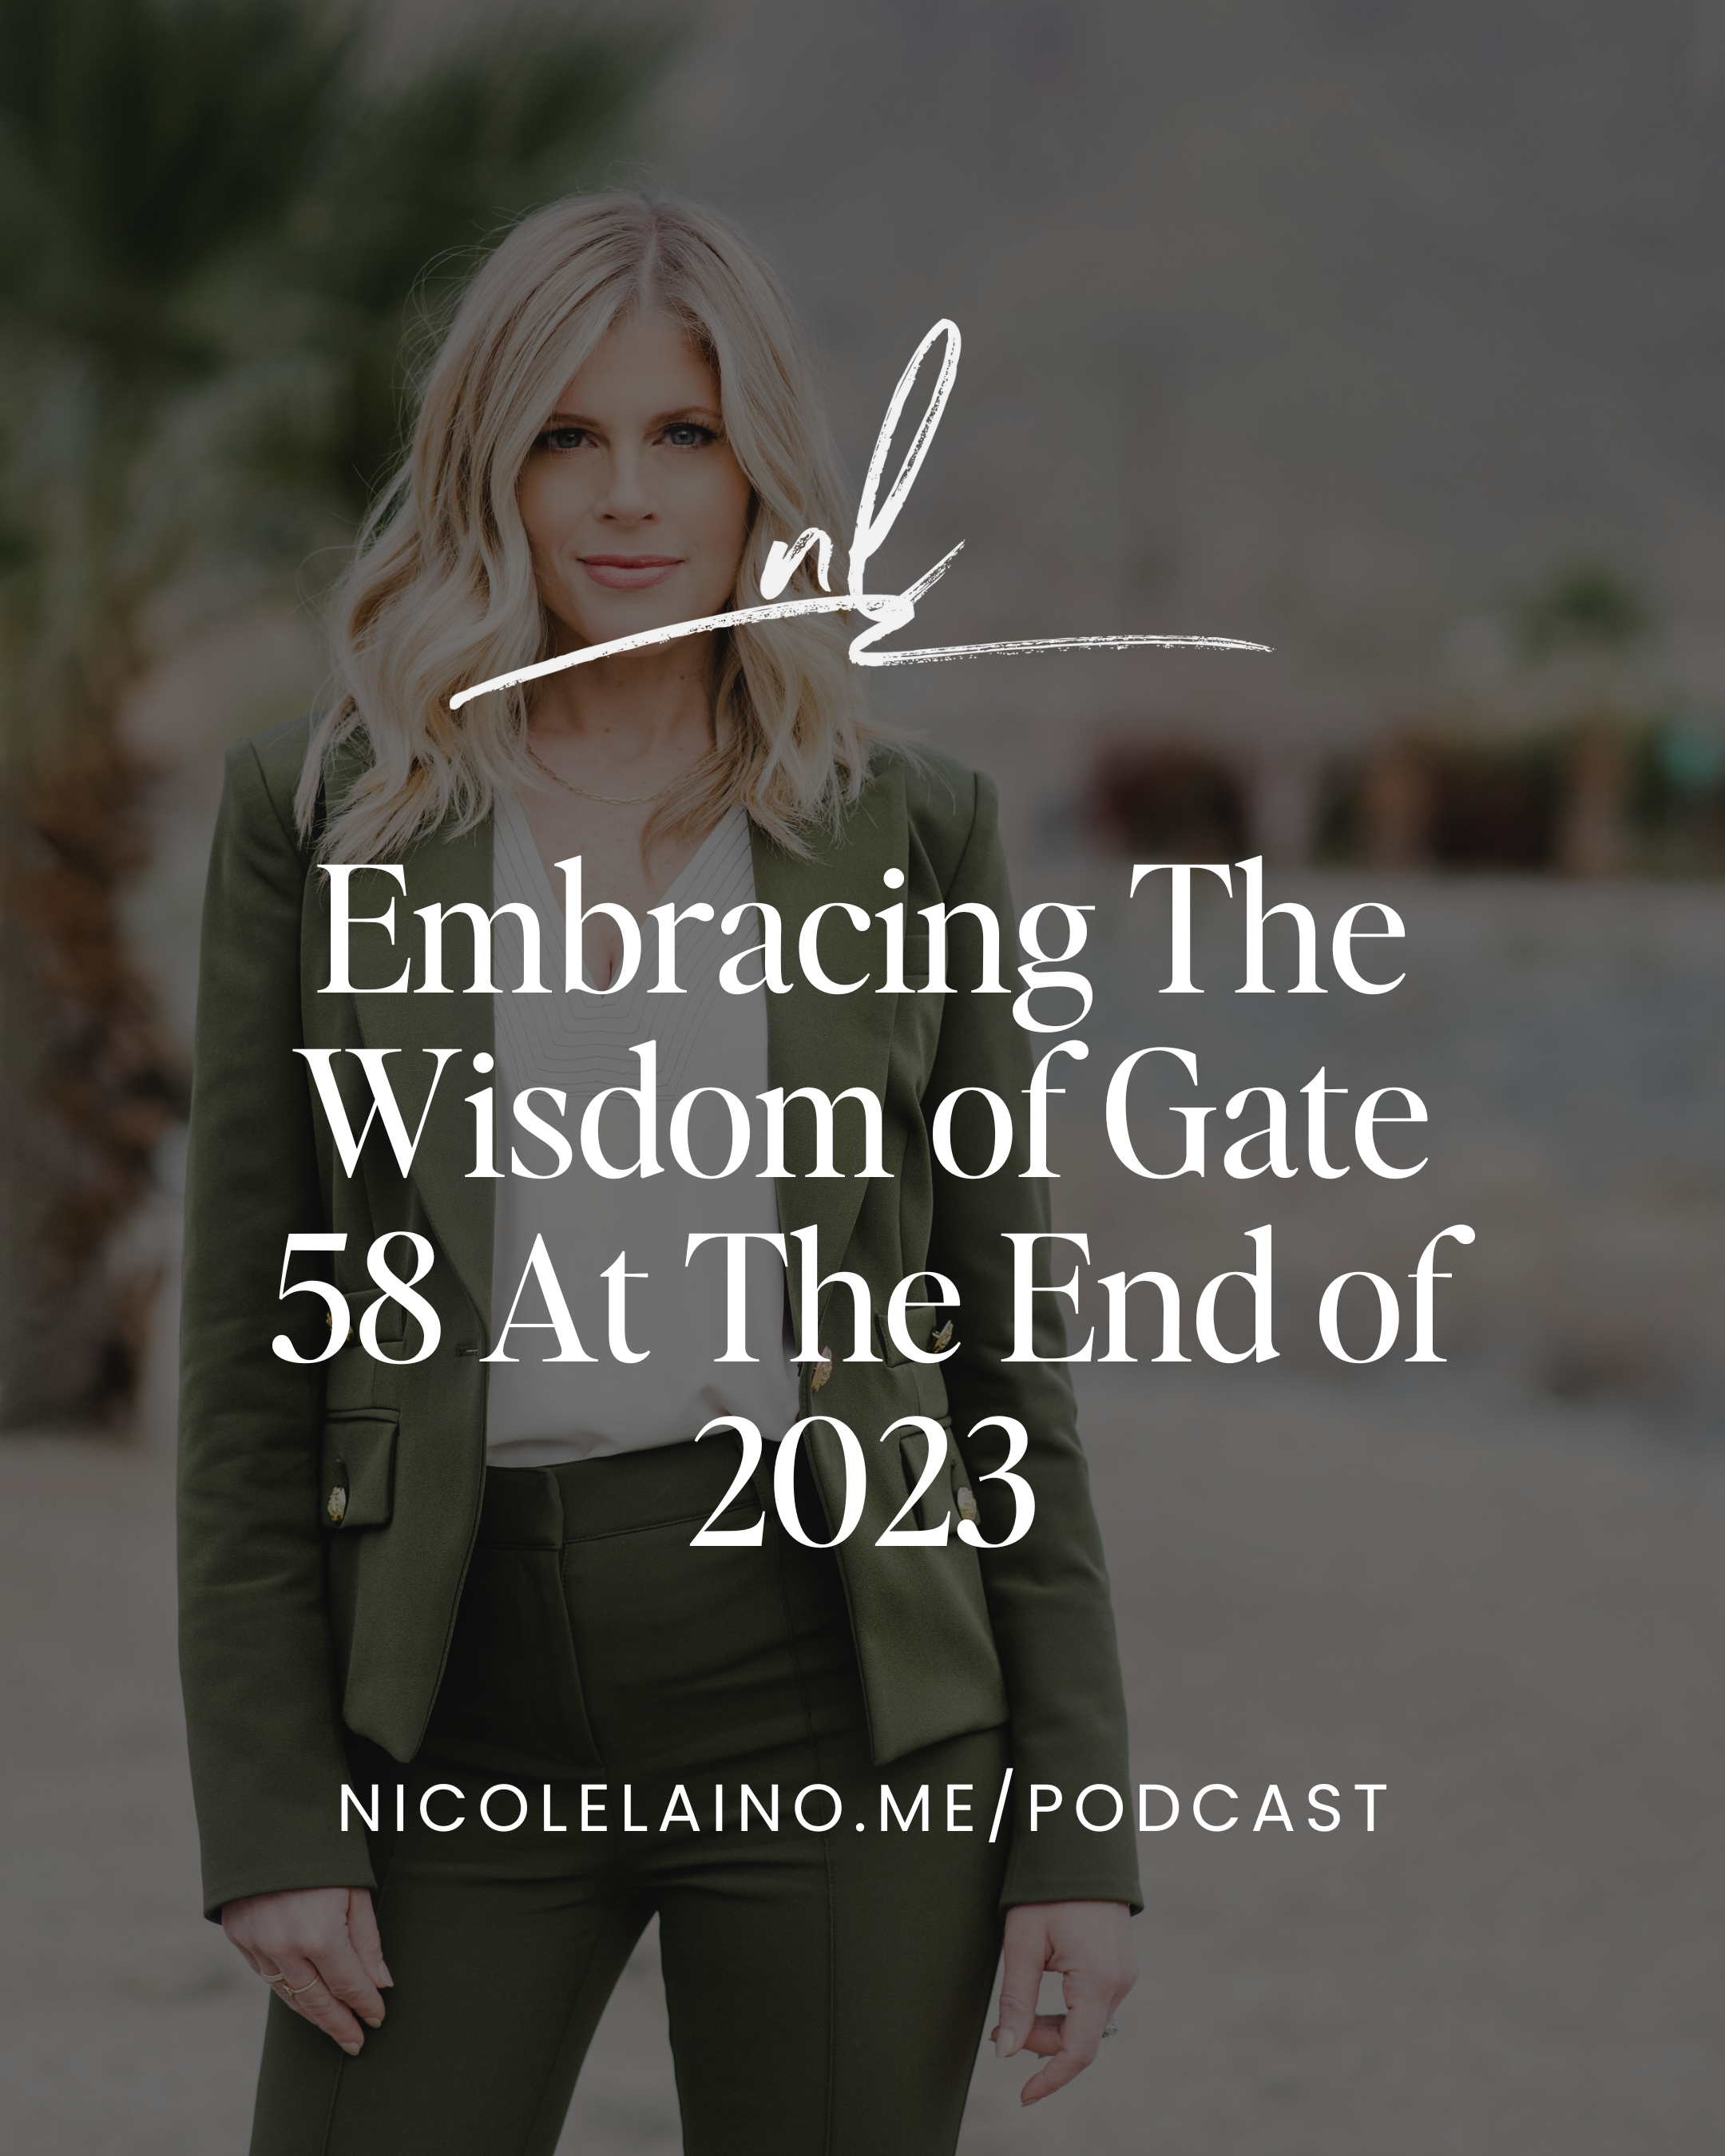 Embracing The Wisdom of Gate 58 At The End of 2023